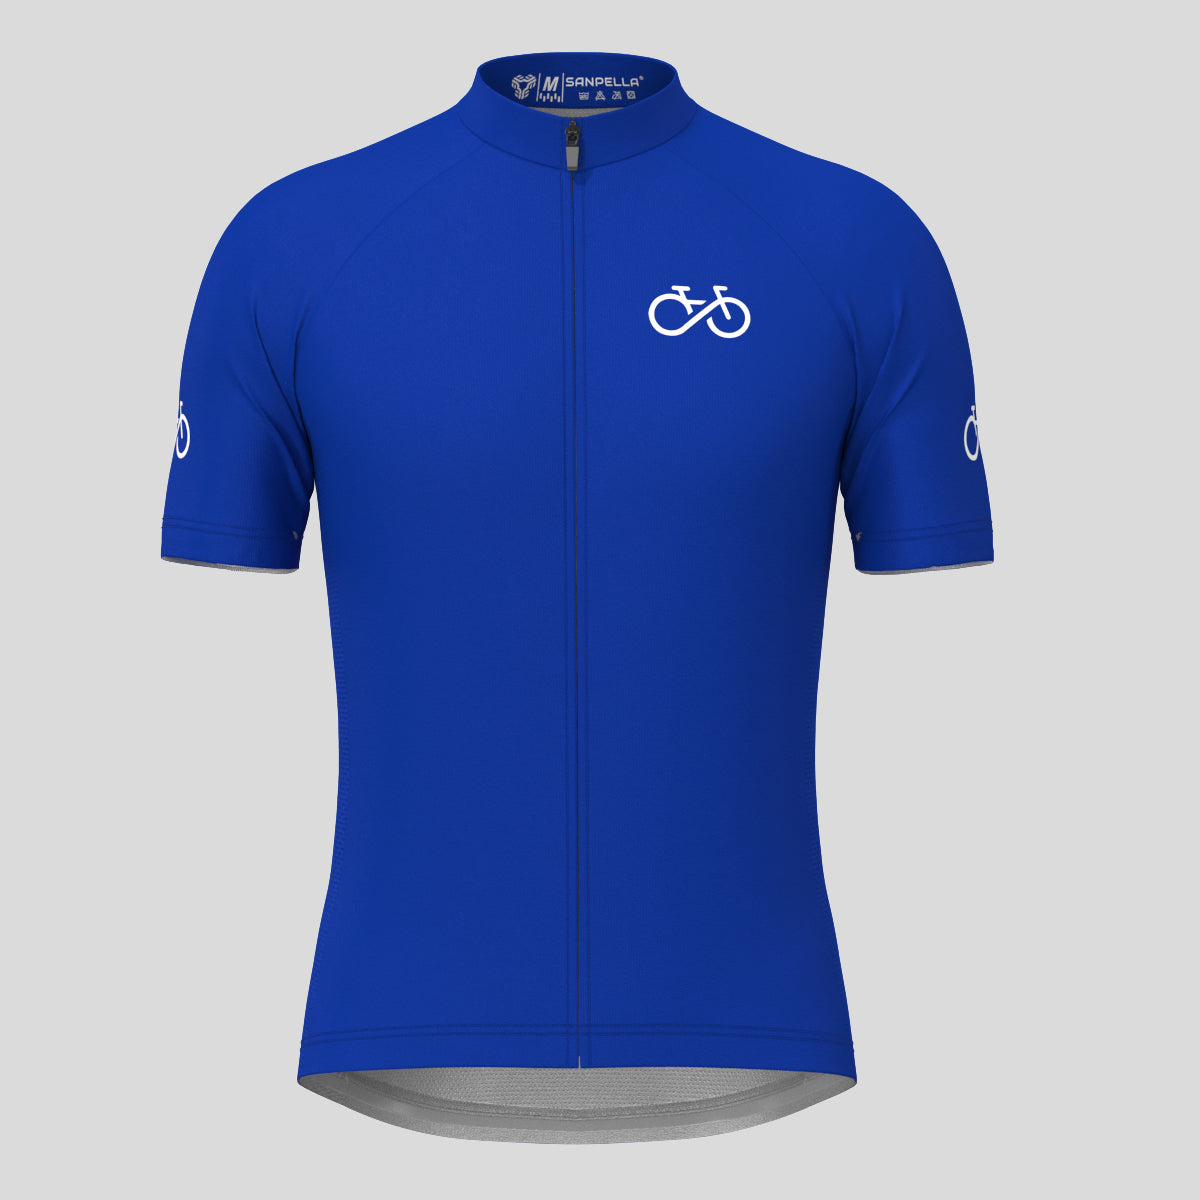 Ride Forever Men's Cycling Jersey -Racing Blue